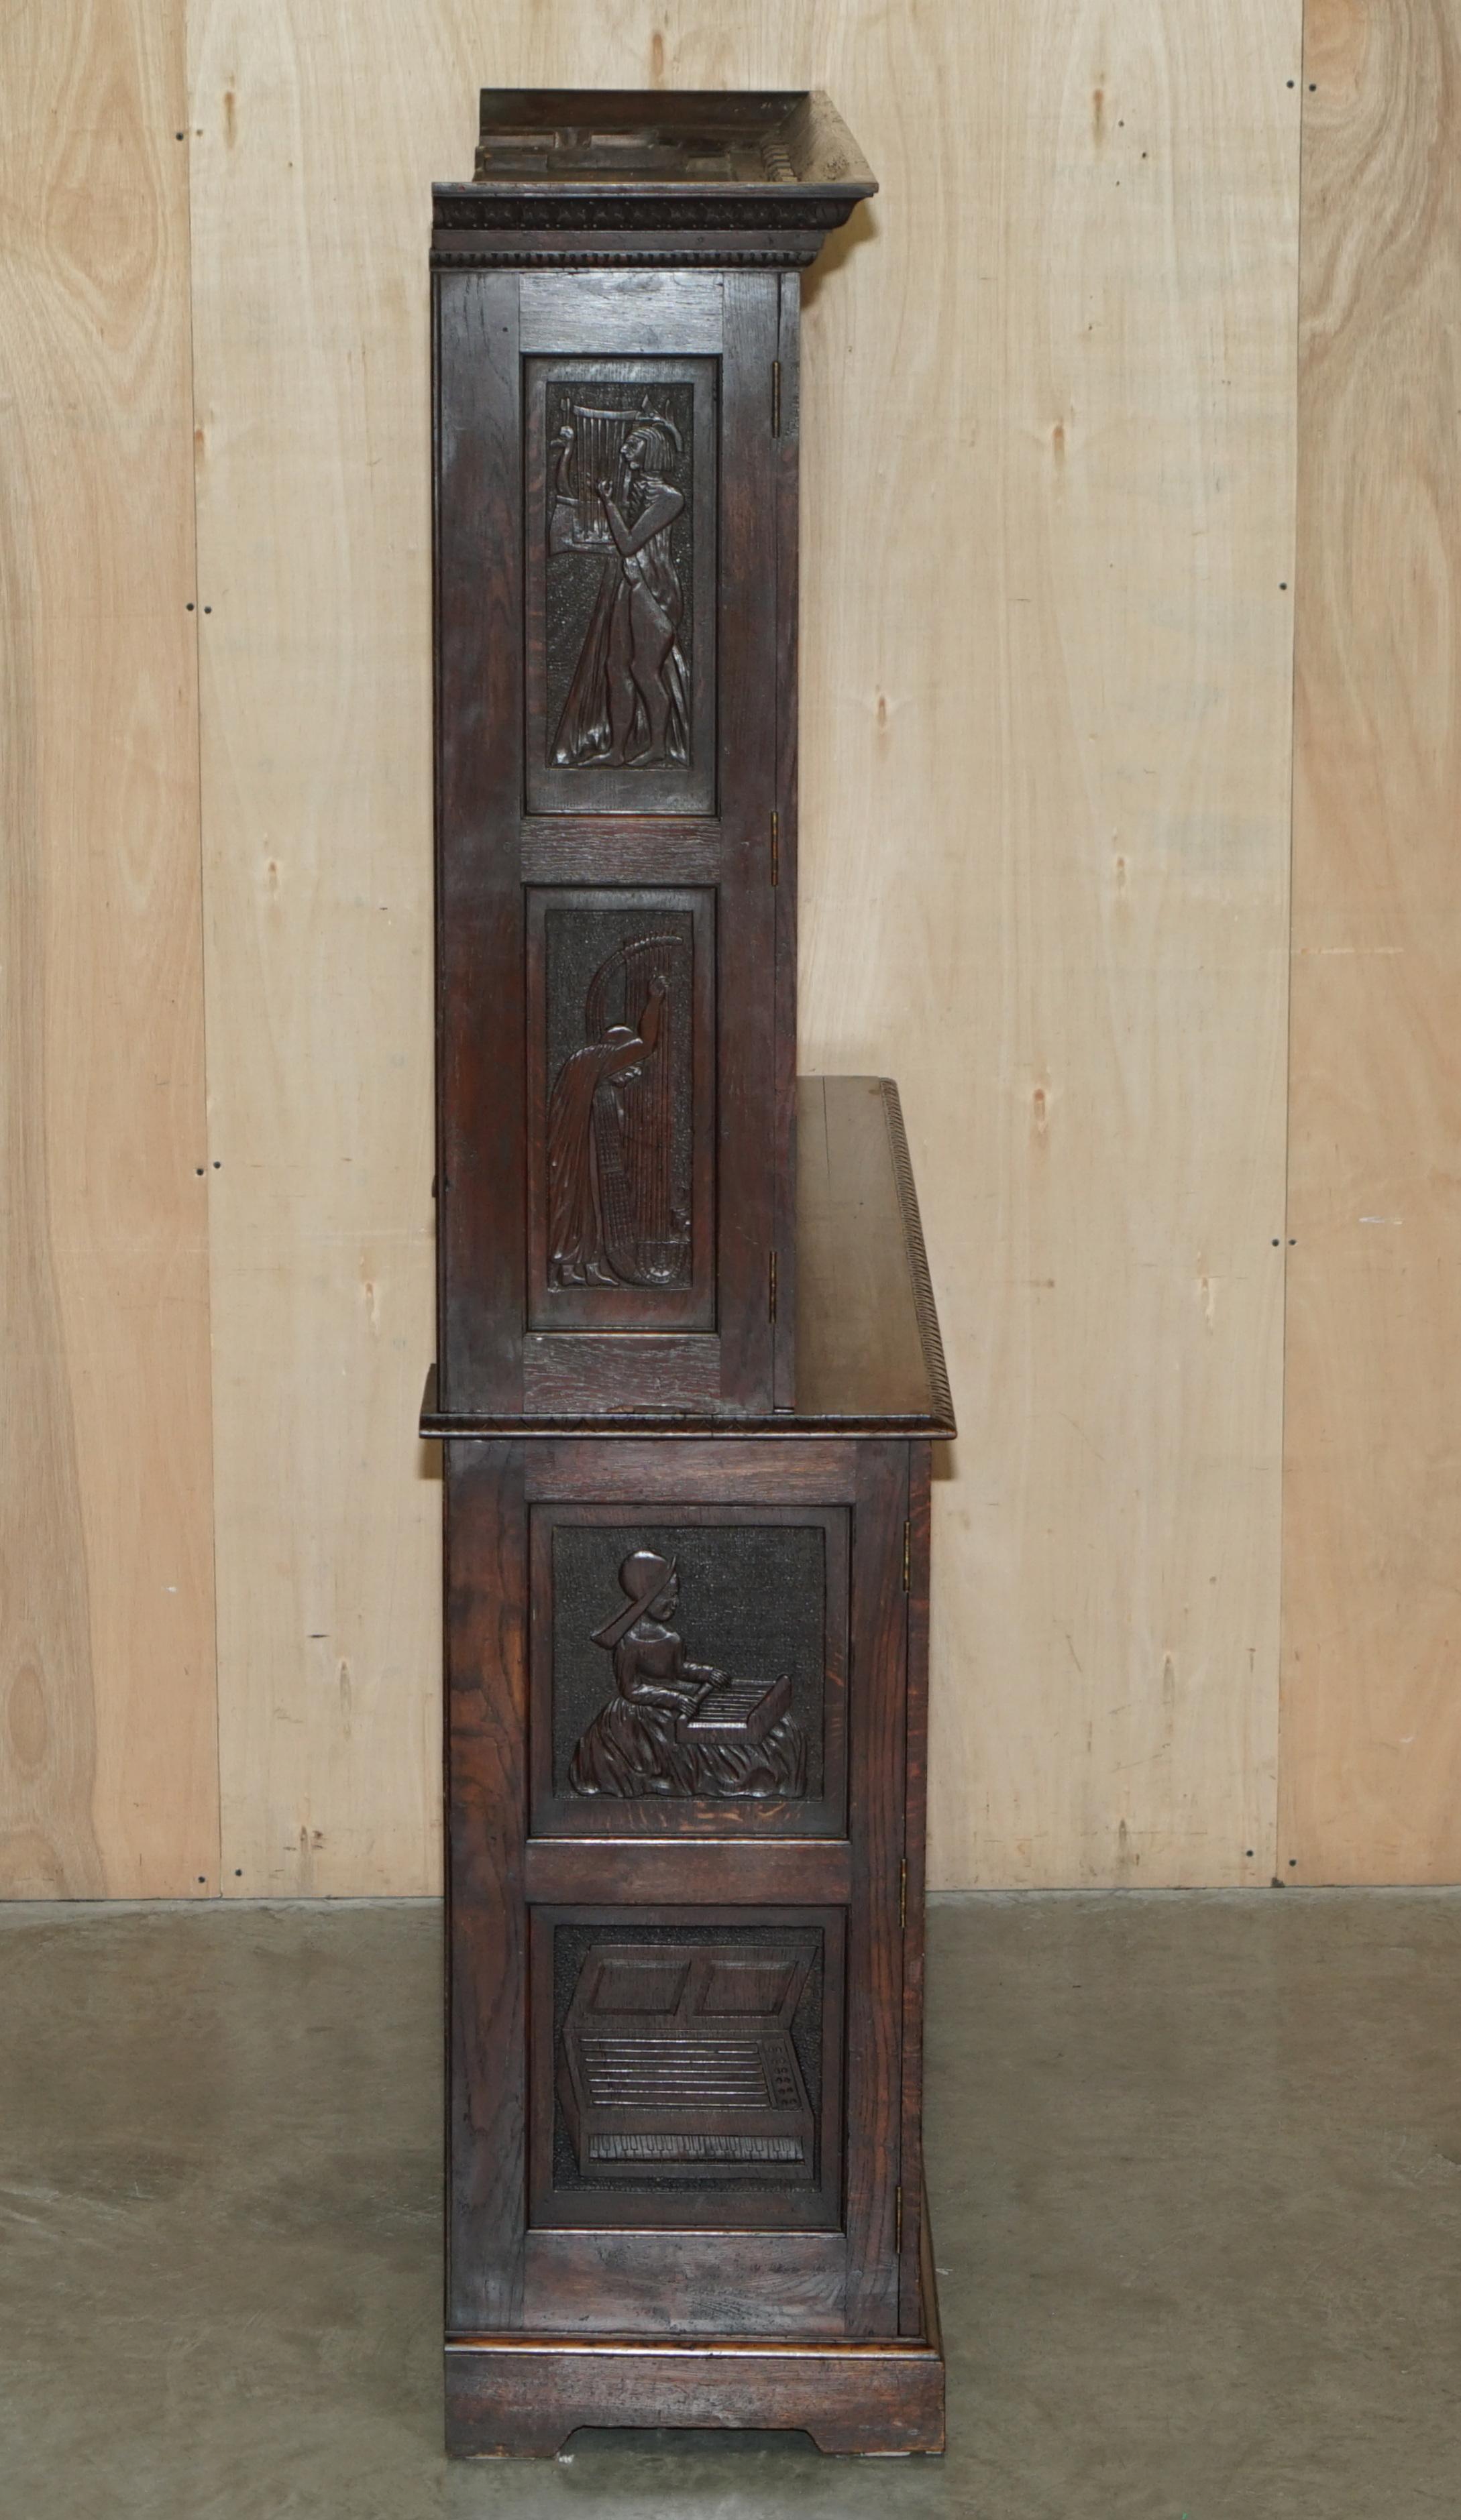 IMPORTANT CARVED BOOKCASE CABiNET FROM THE BATE COLLECTION IN OXFORD UNIVERSITY For Sale 8